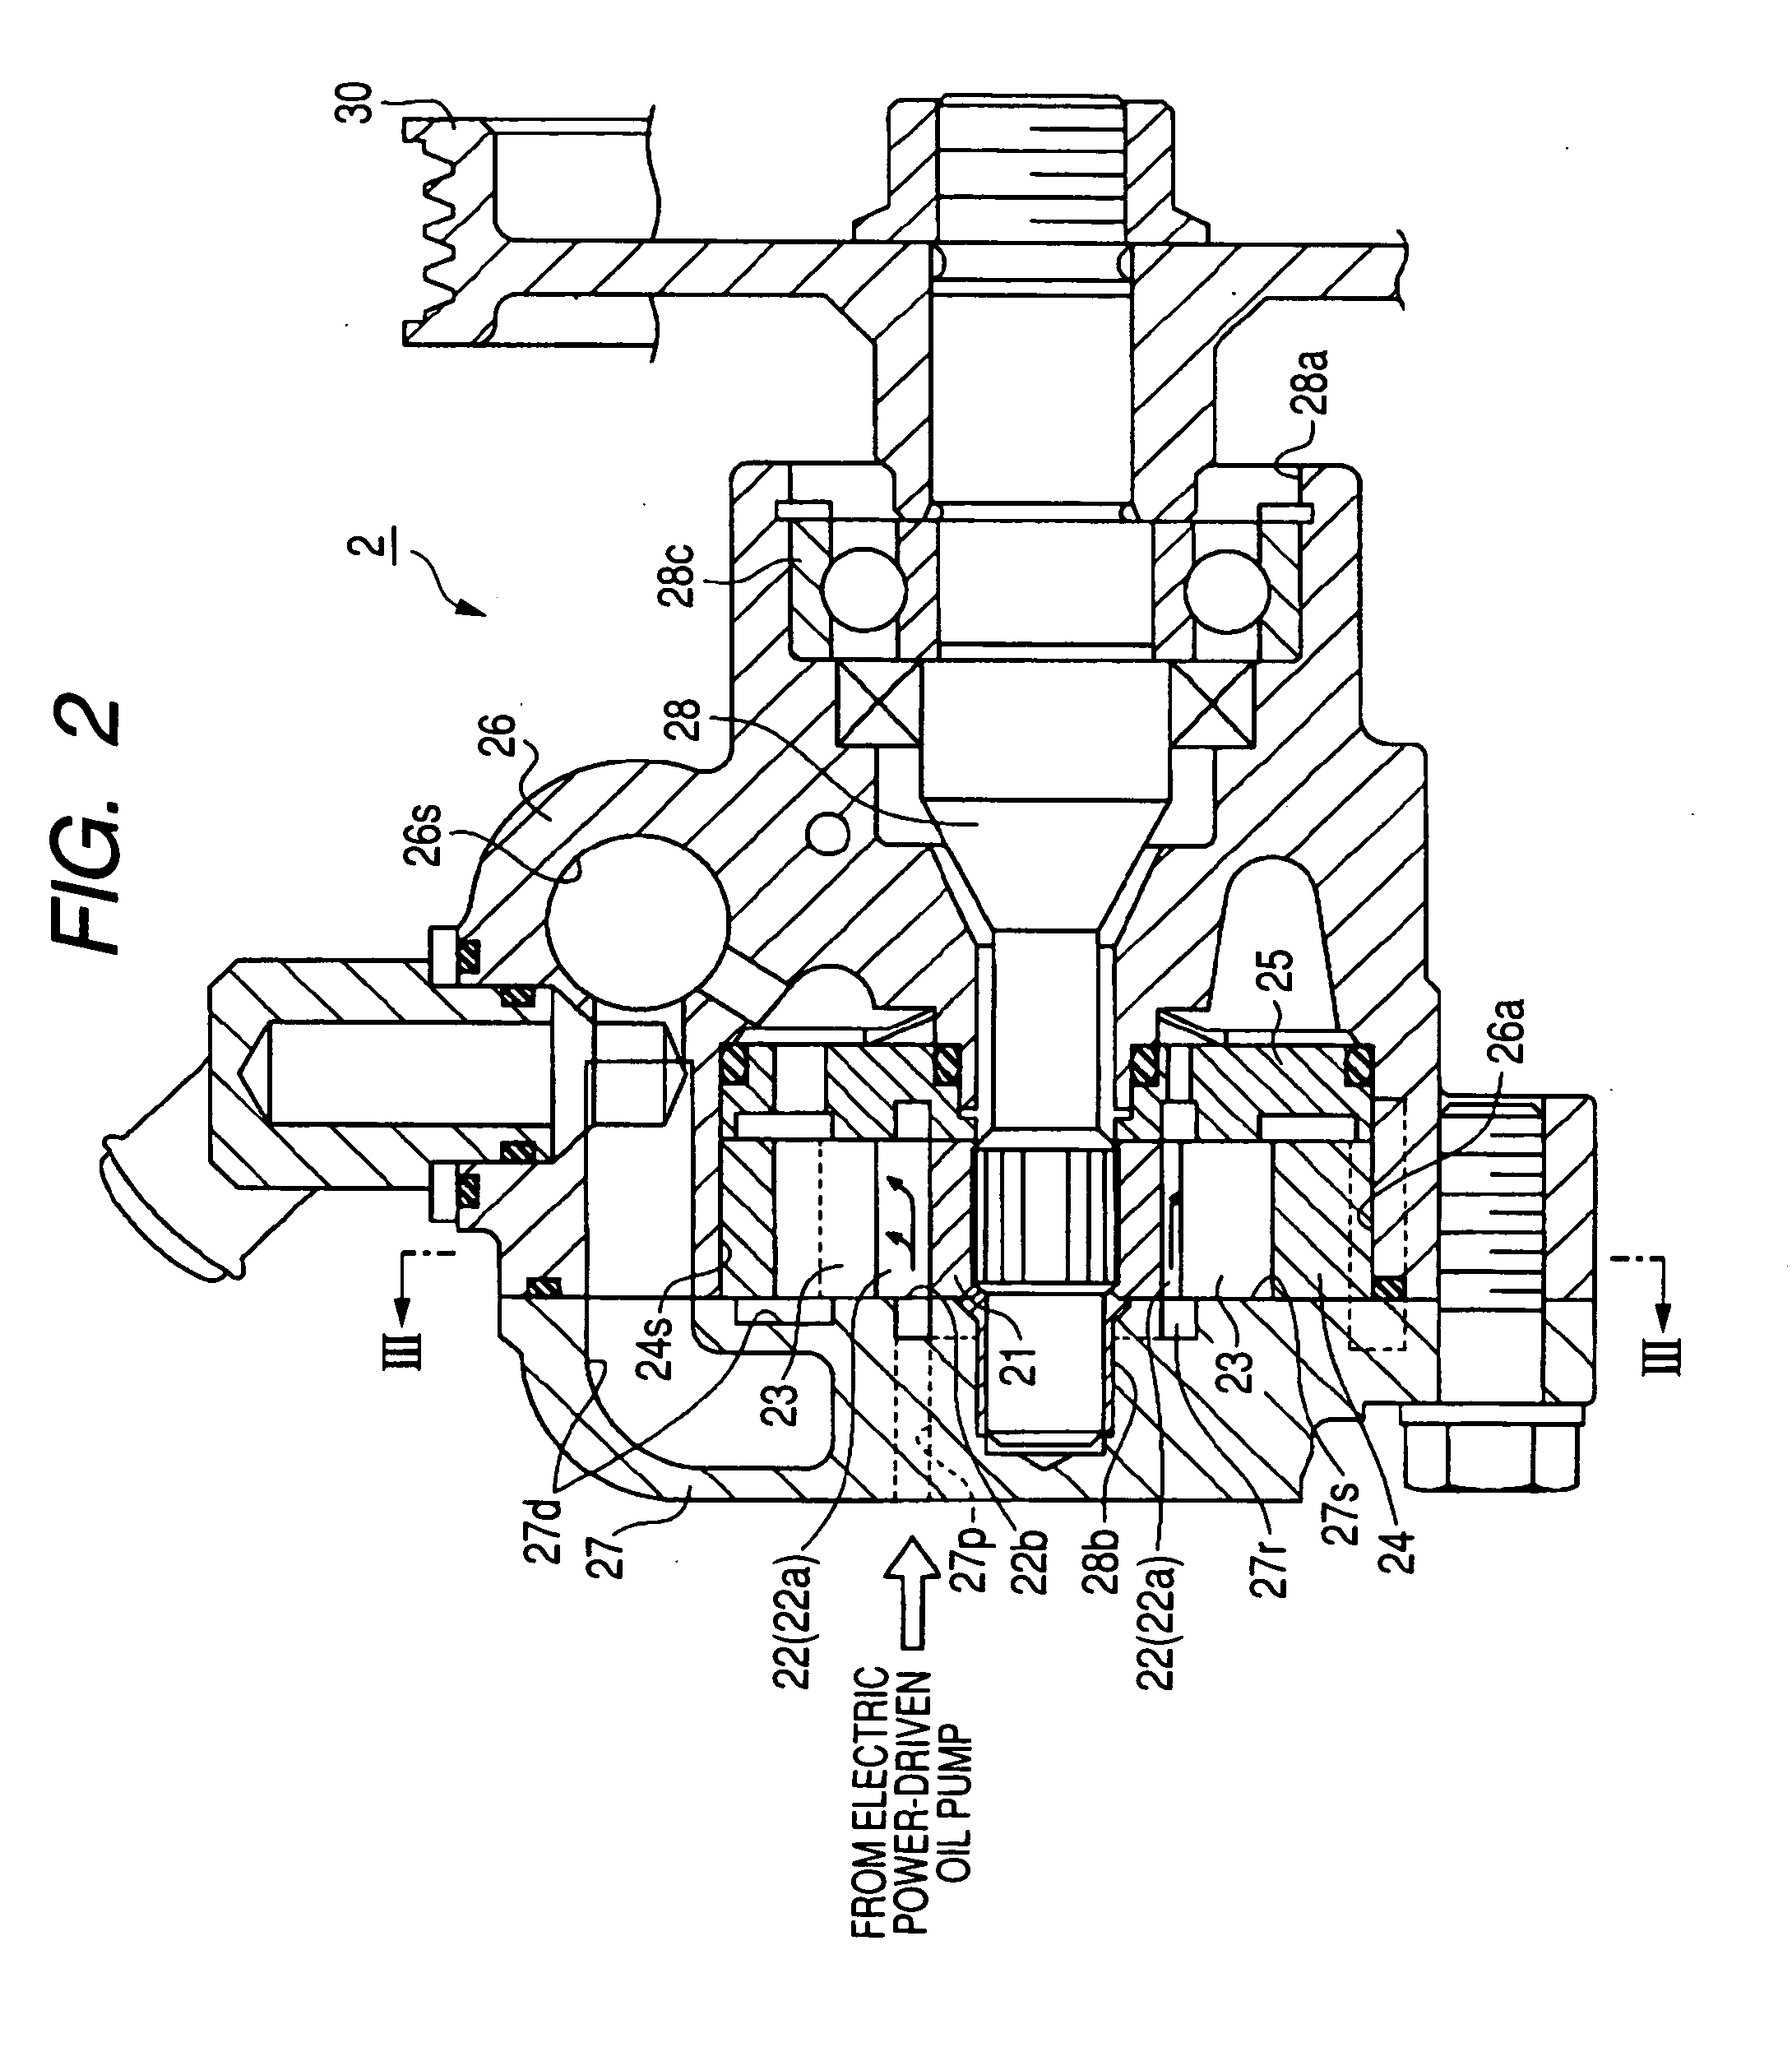 Oil pump system for vehicle